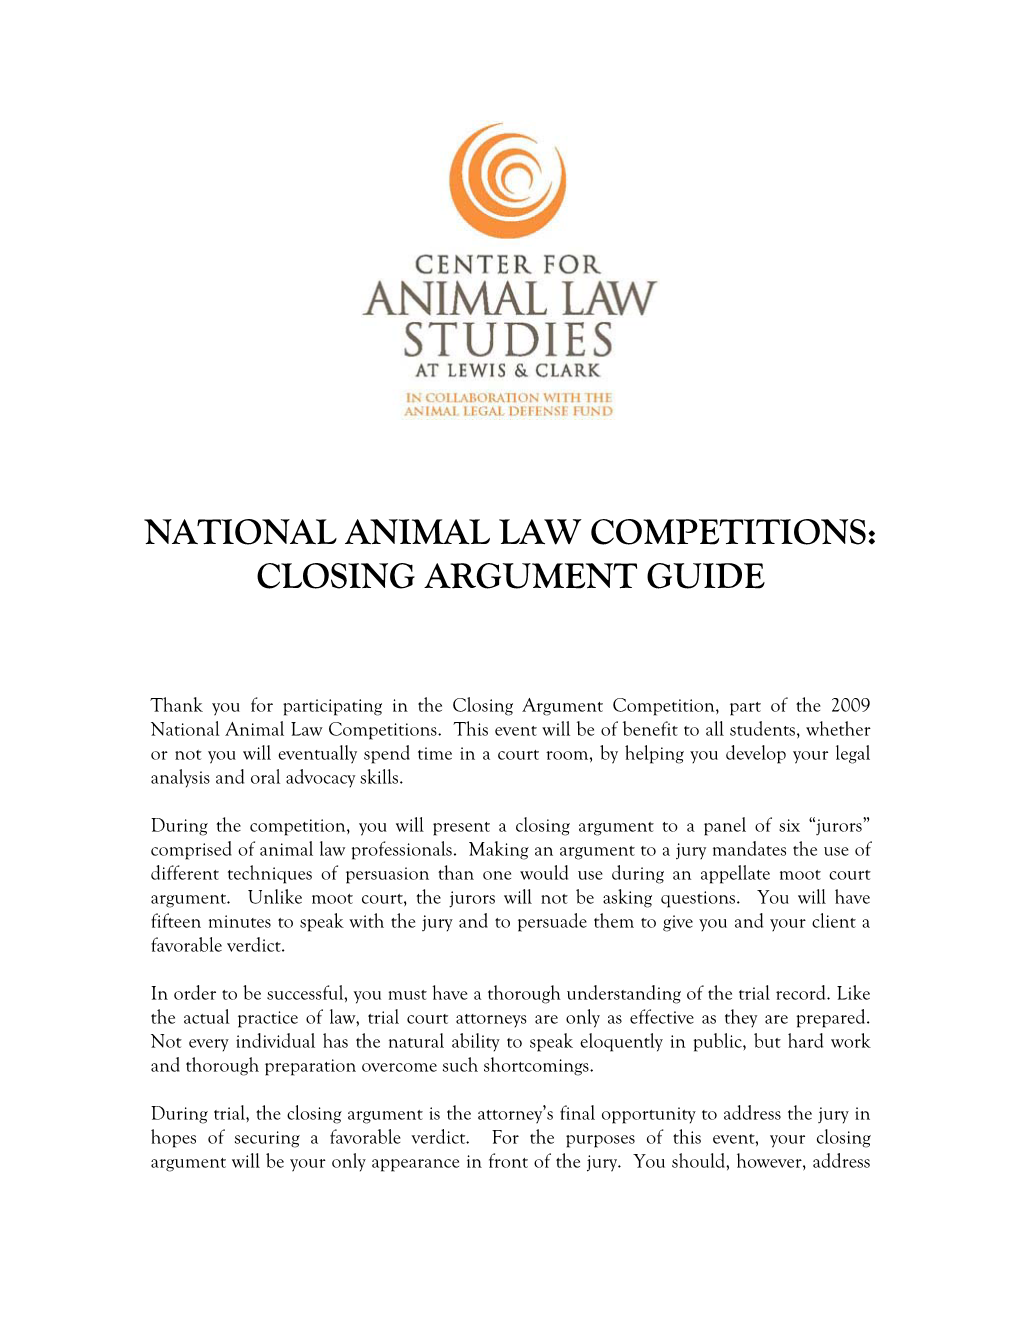 National Animal Law Competitions: Closing Argument Guide